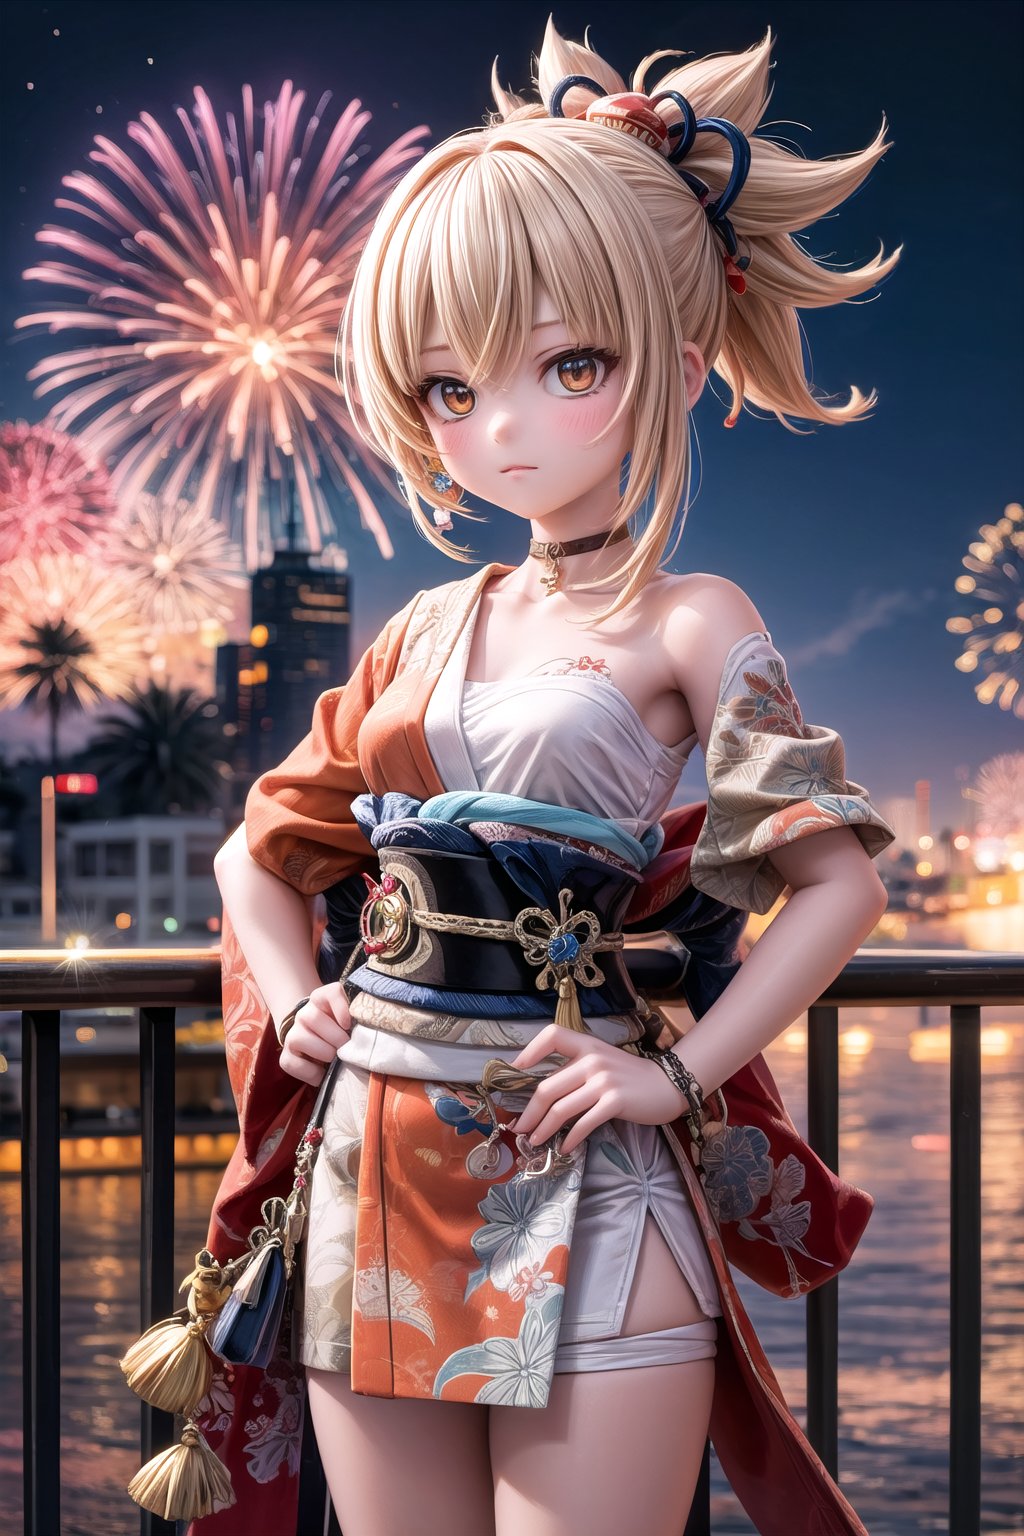 a 23 years old girl yoimiyadef, stands in front of a fireworks store,